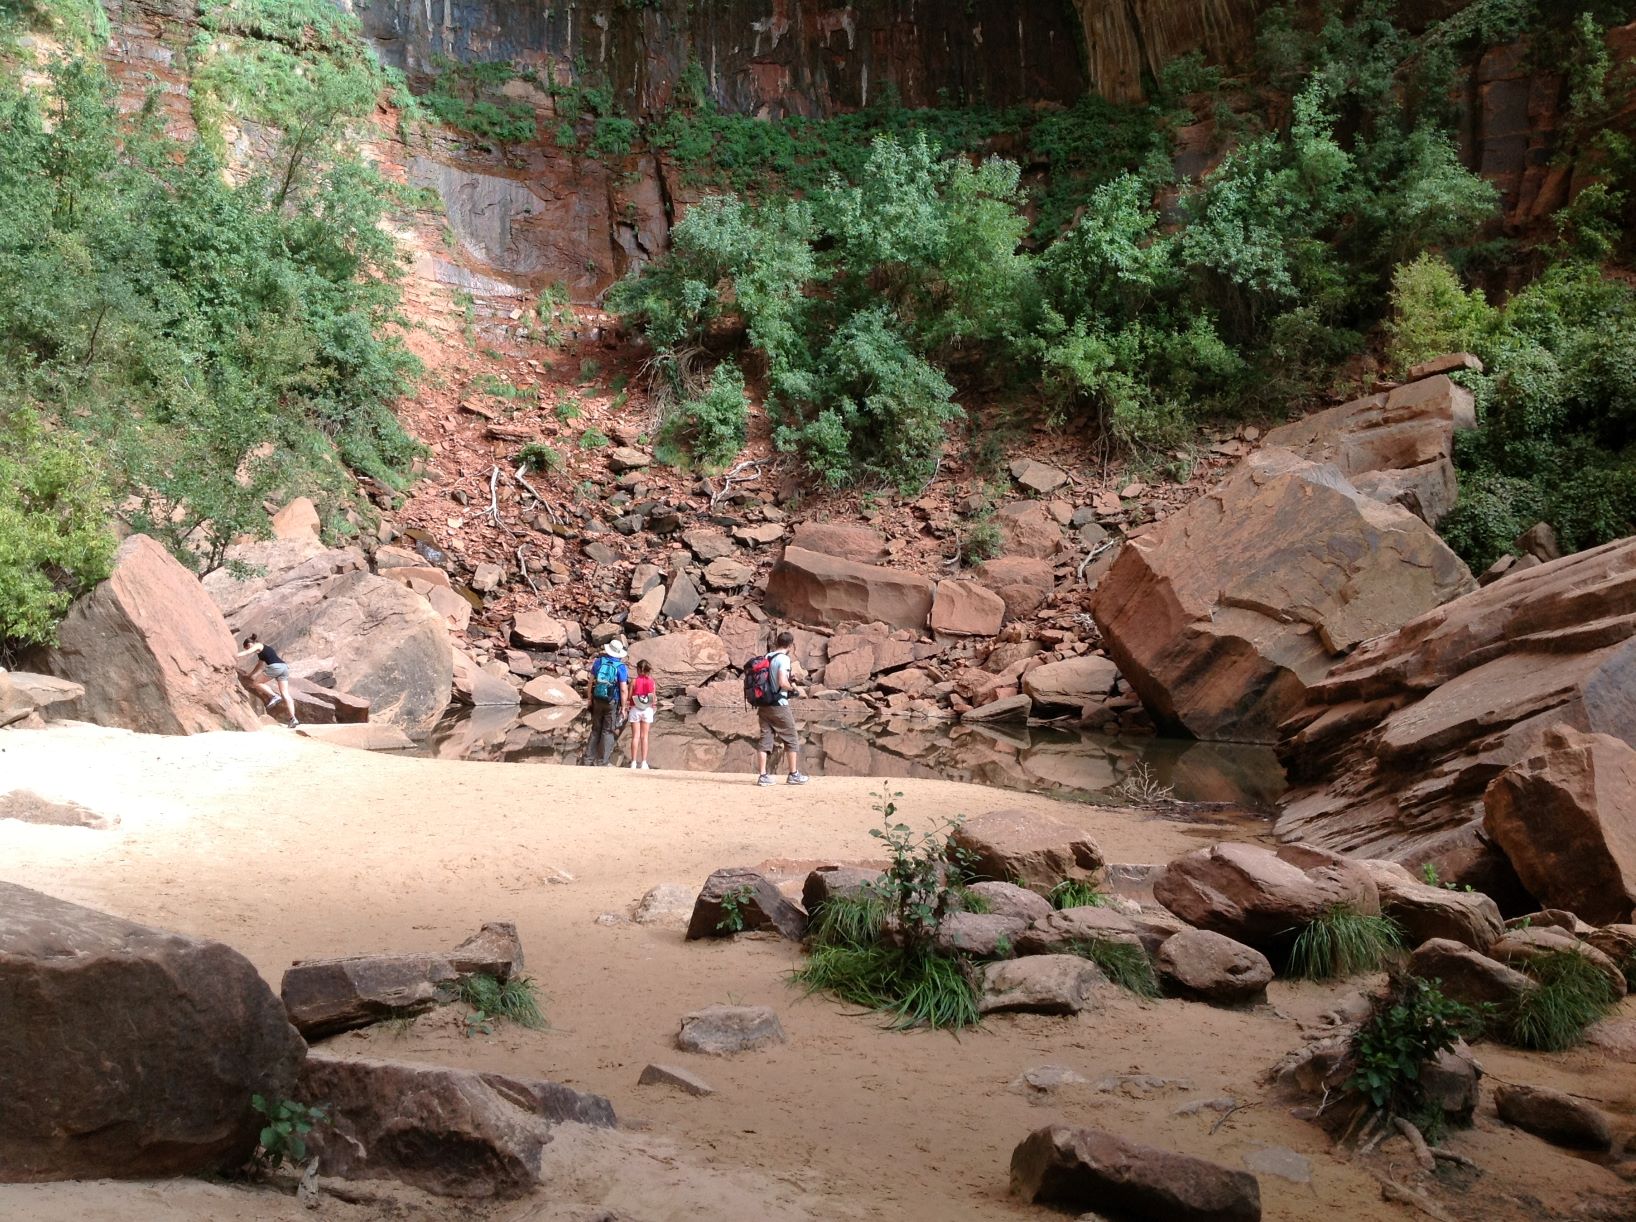 Upper Emerald Pools with two hikers